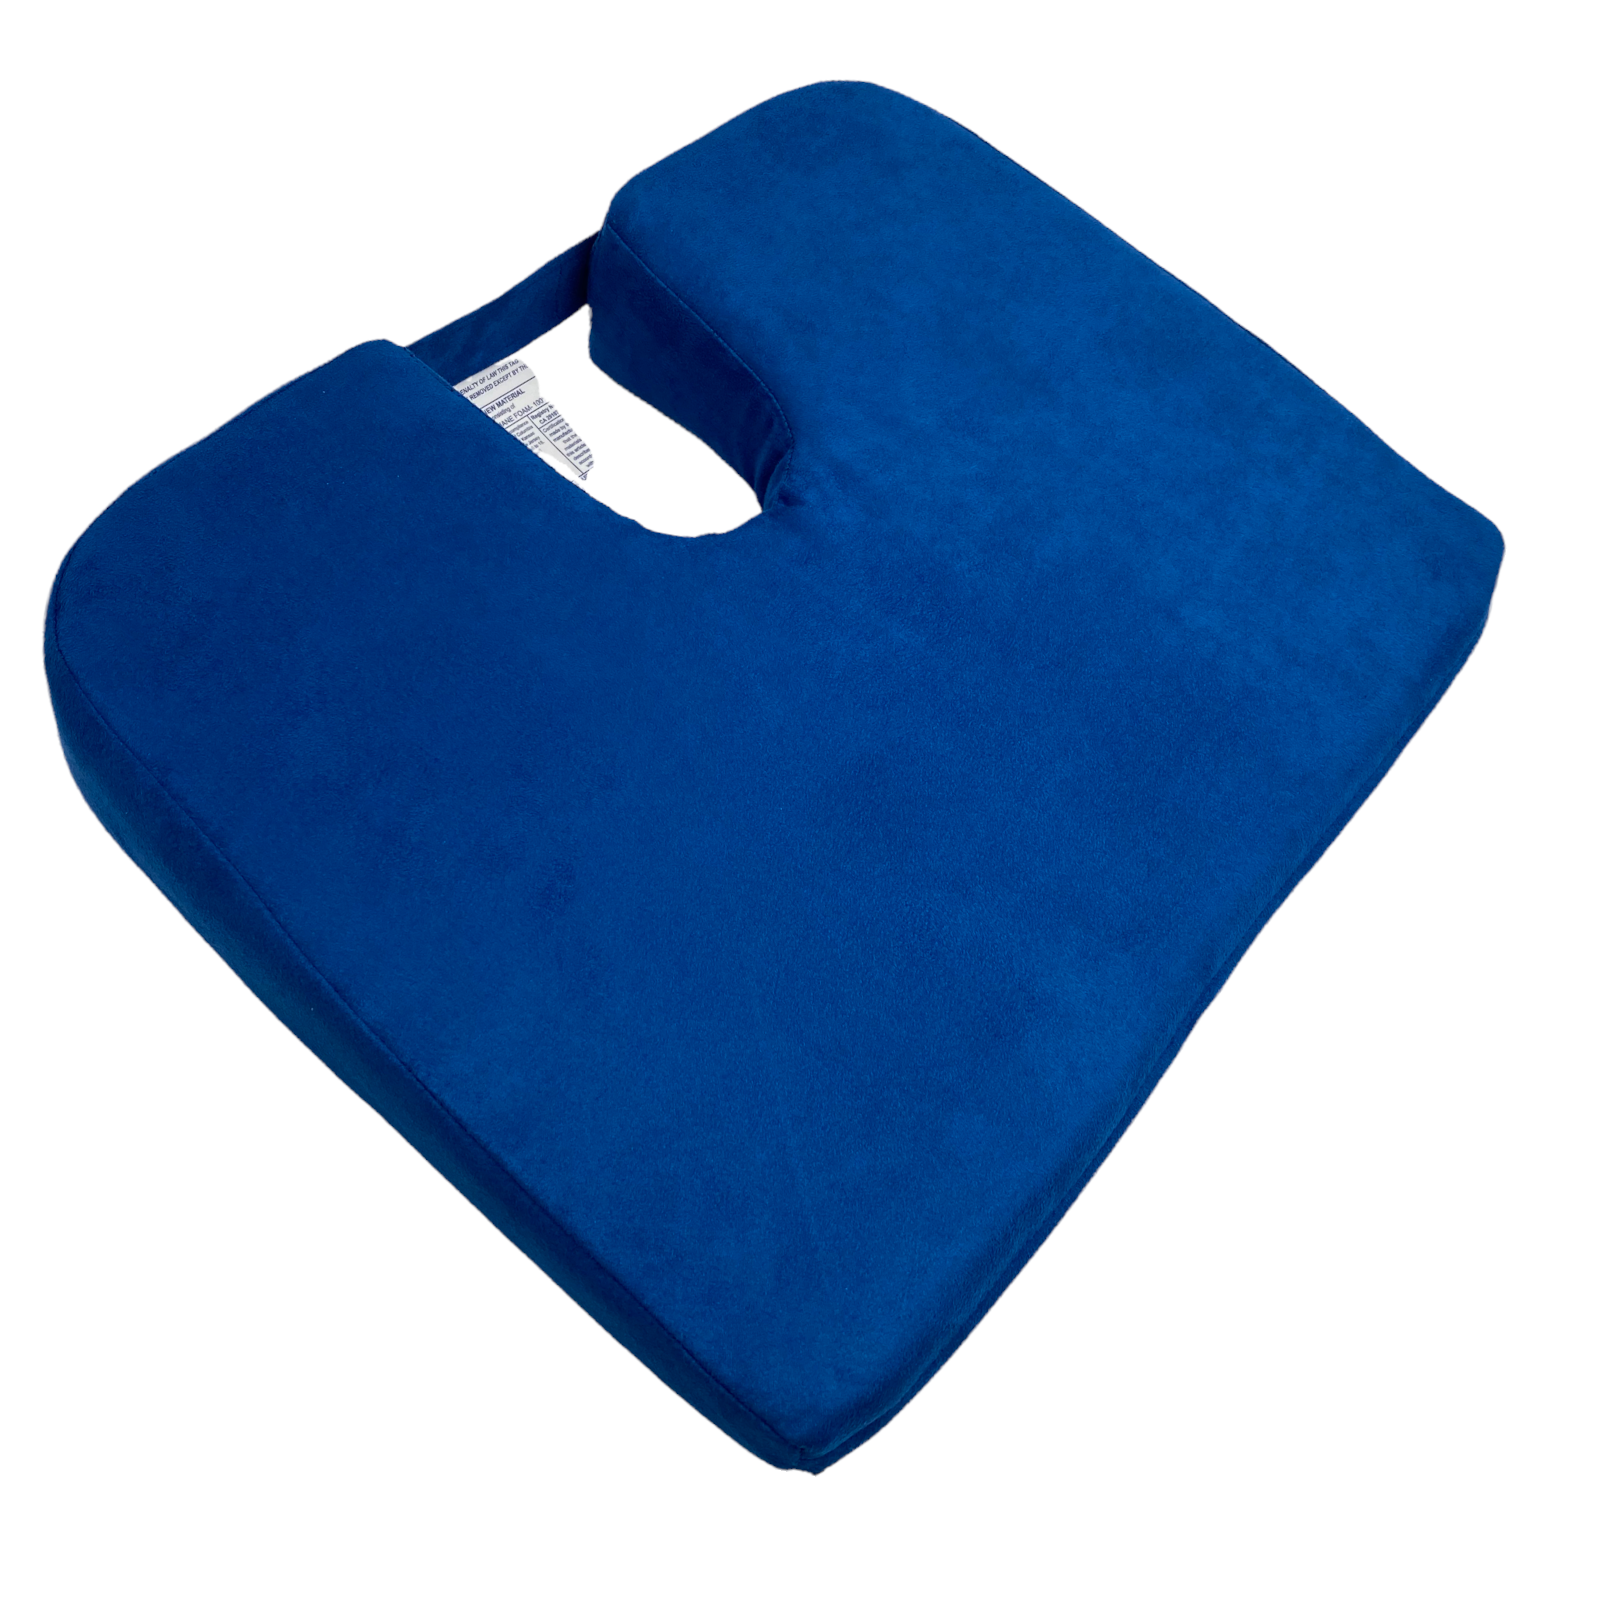 Extra Firm Car Cush Orthopedic Seat Cushion Relieves and Prevents Pain